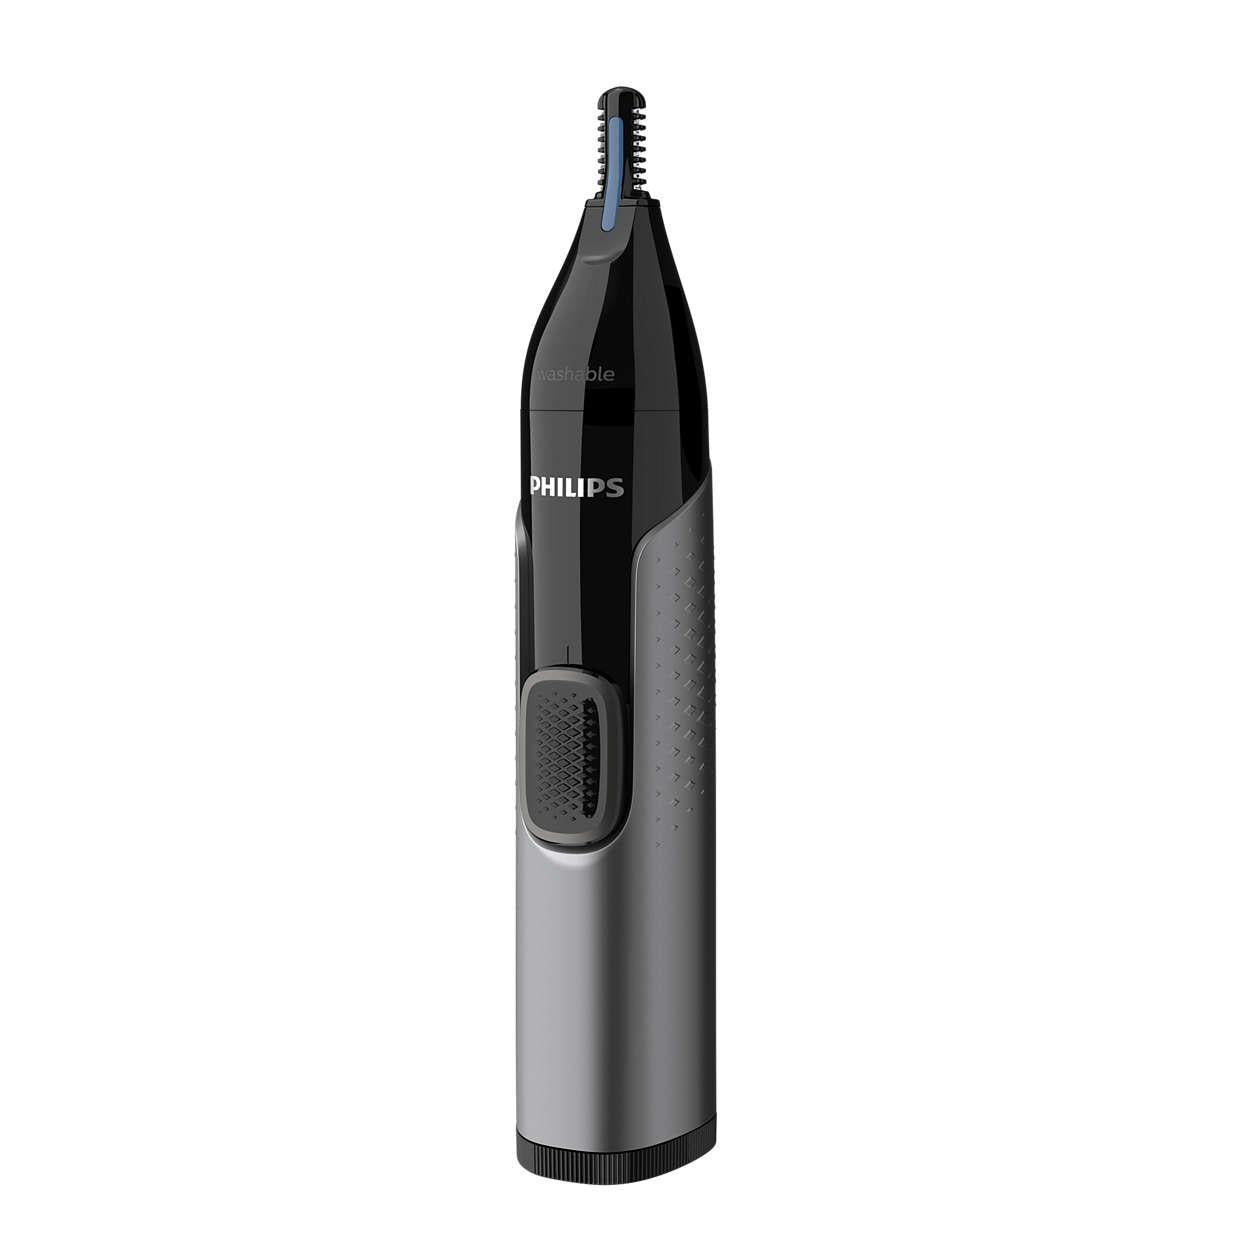 Philips Nose Hair Trimmer NT3650 Nose Ear Eyebrow Trimmer Shower Proof